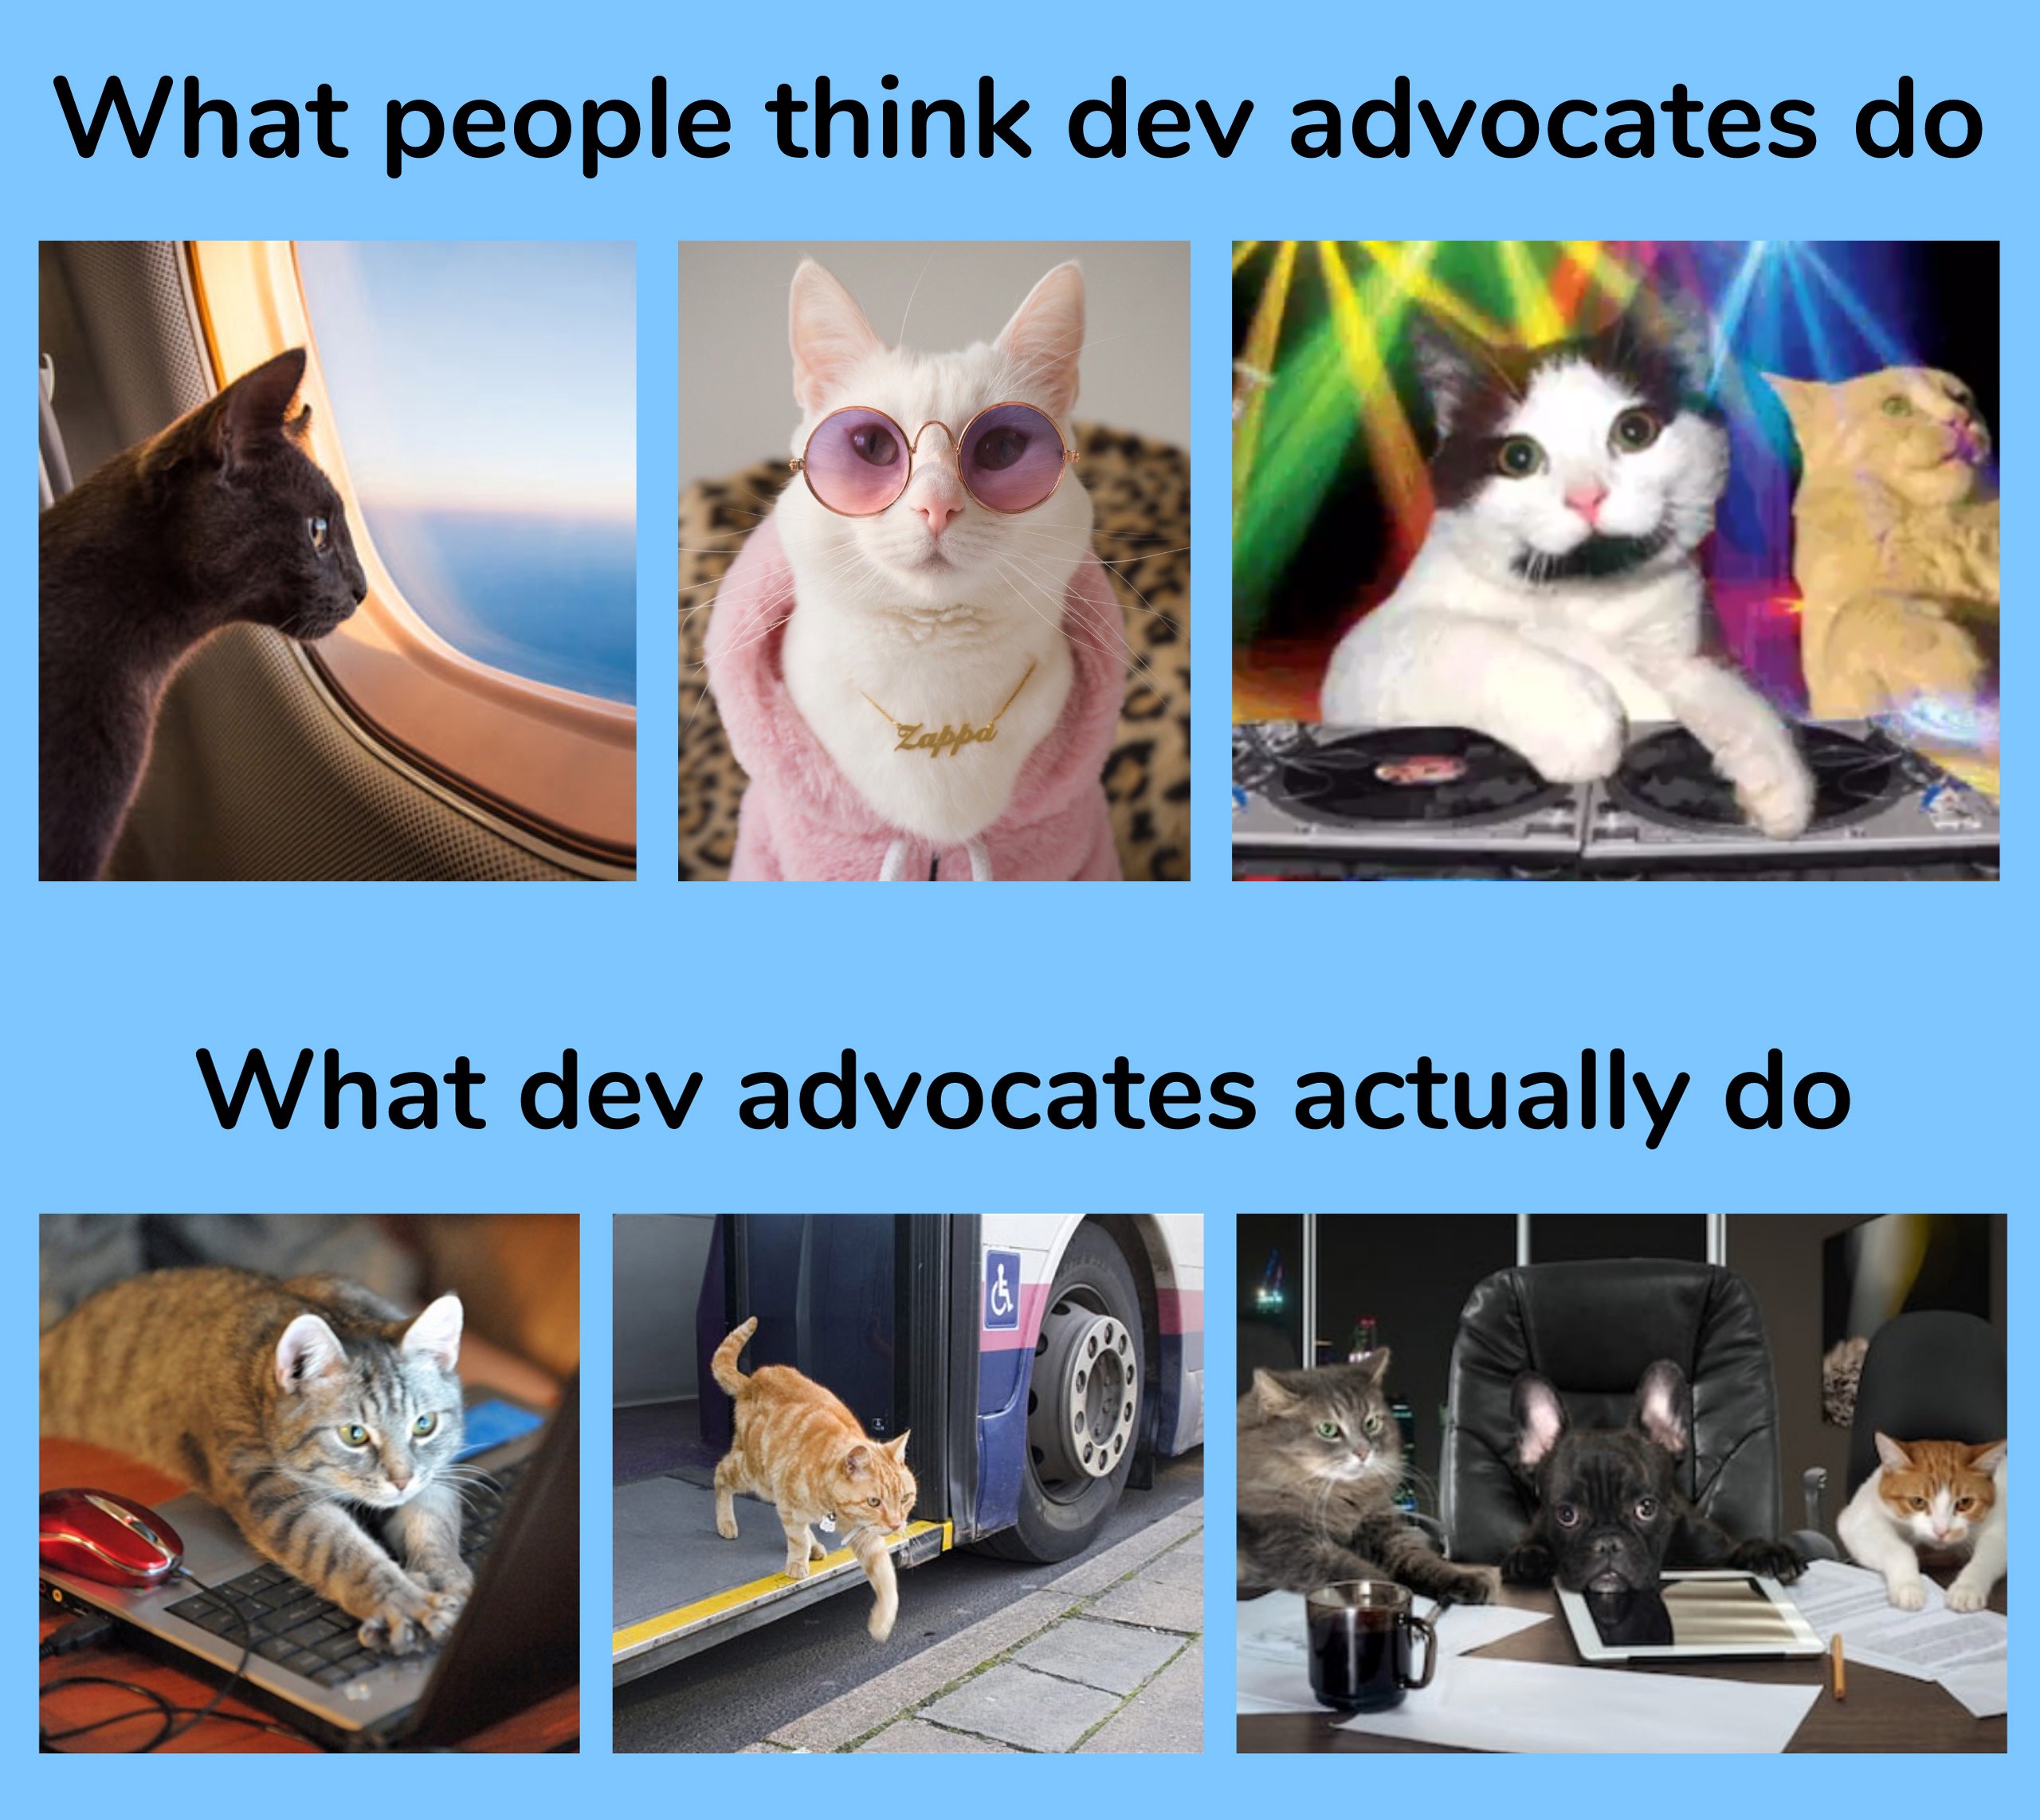 What people think dev advocates do versus what they actually do